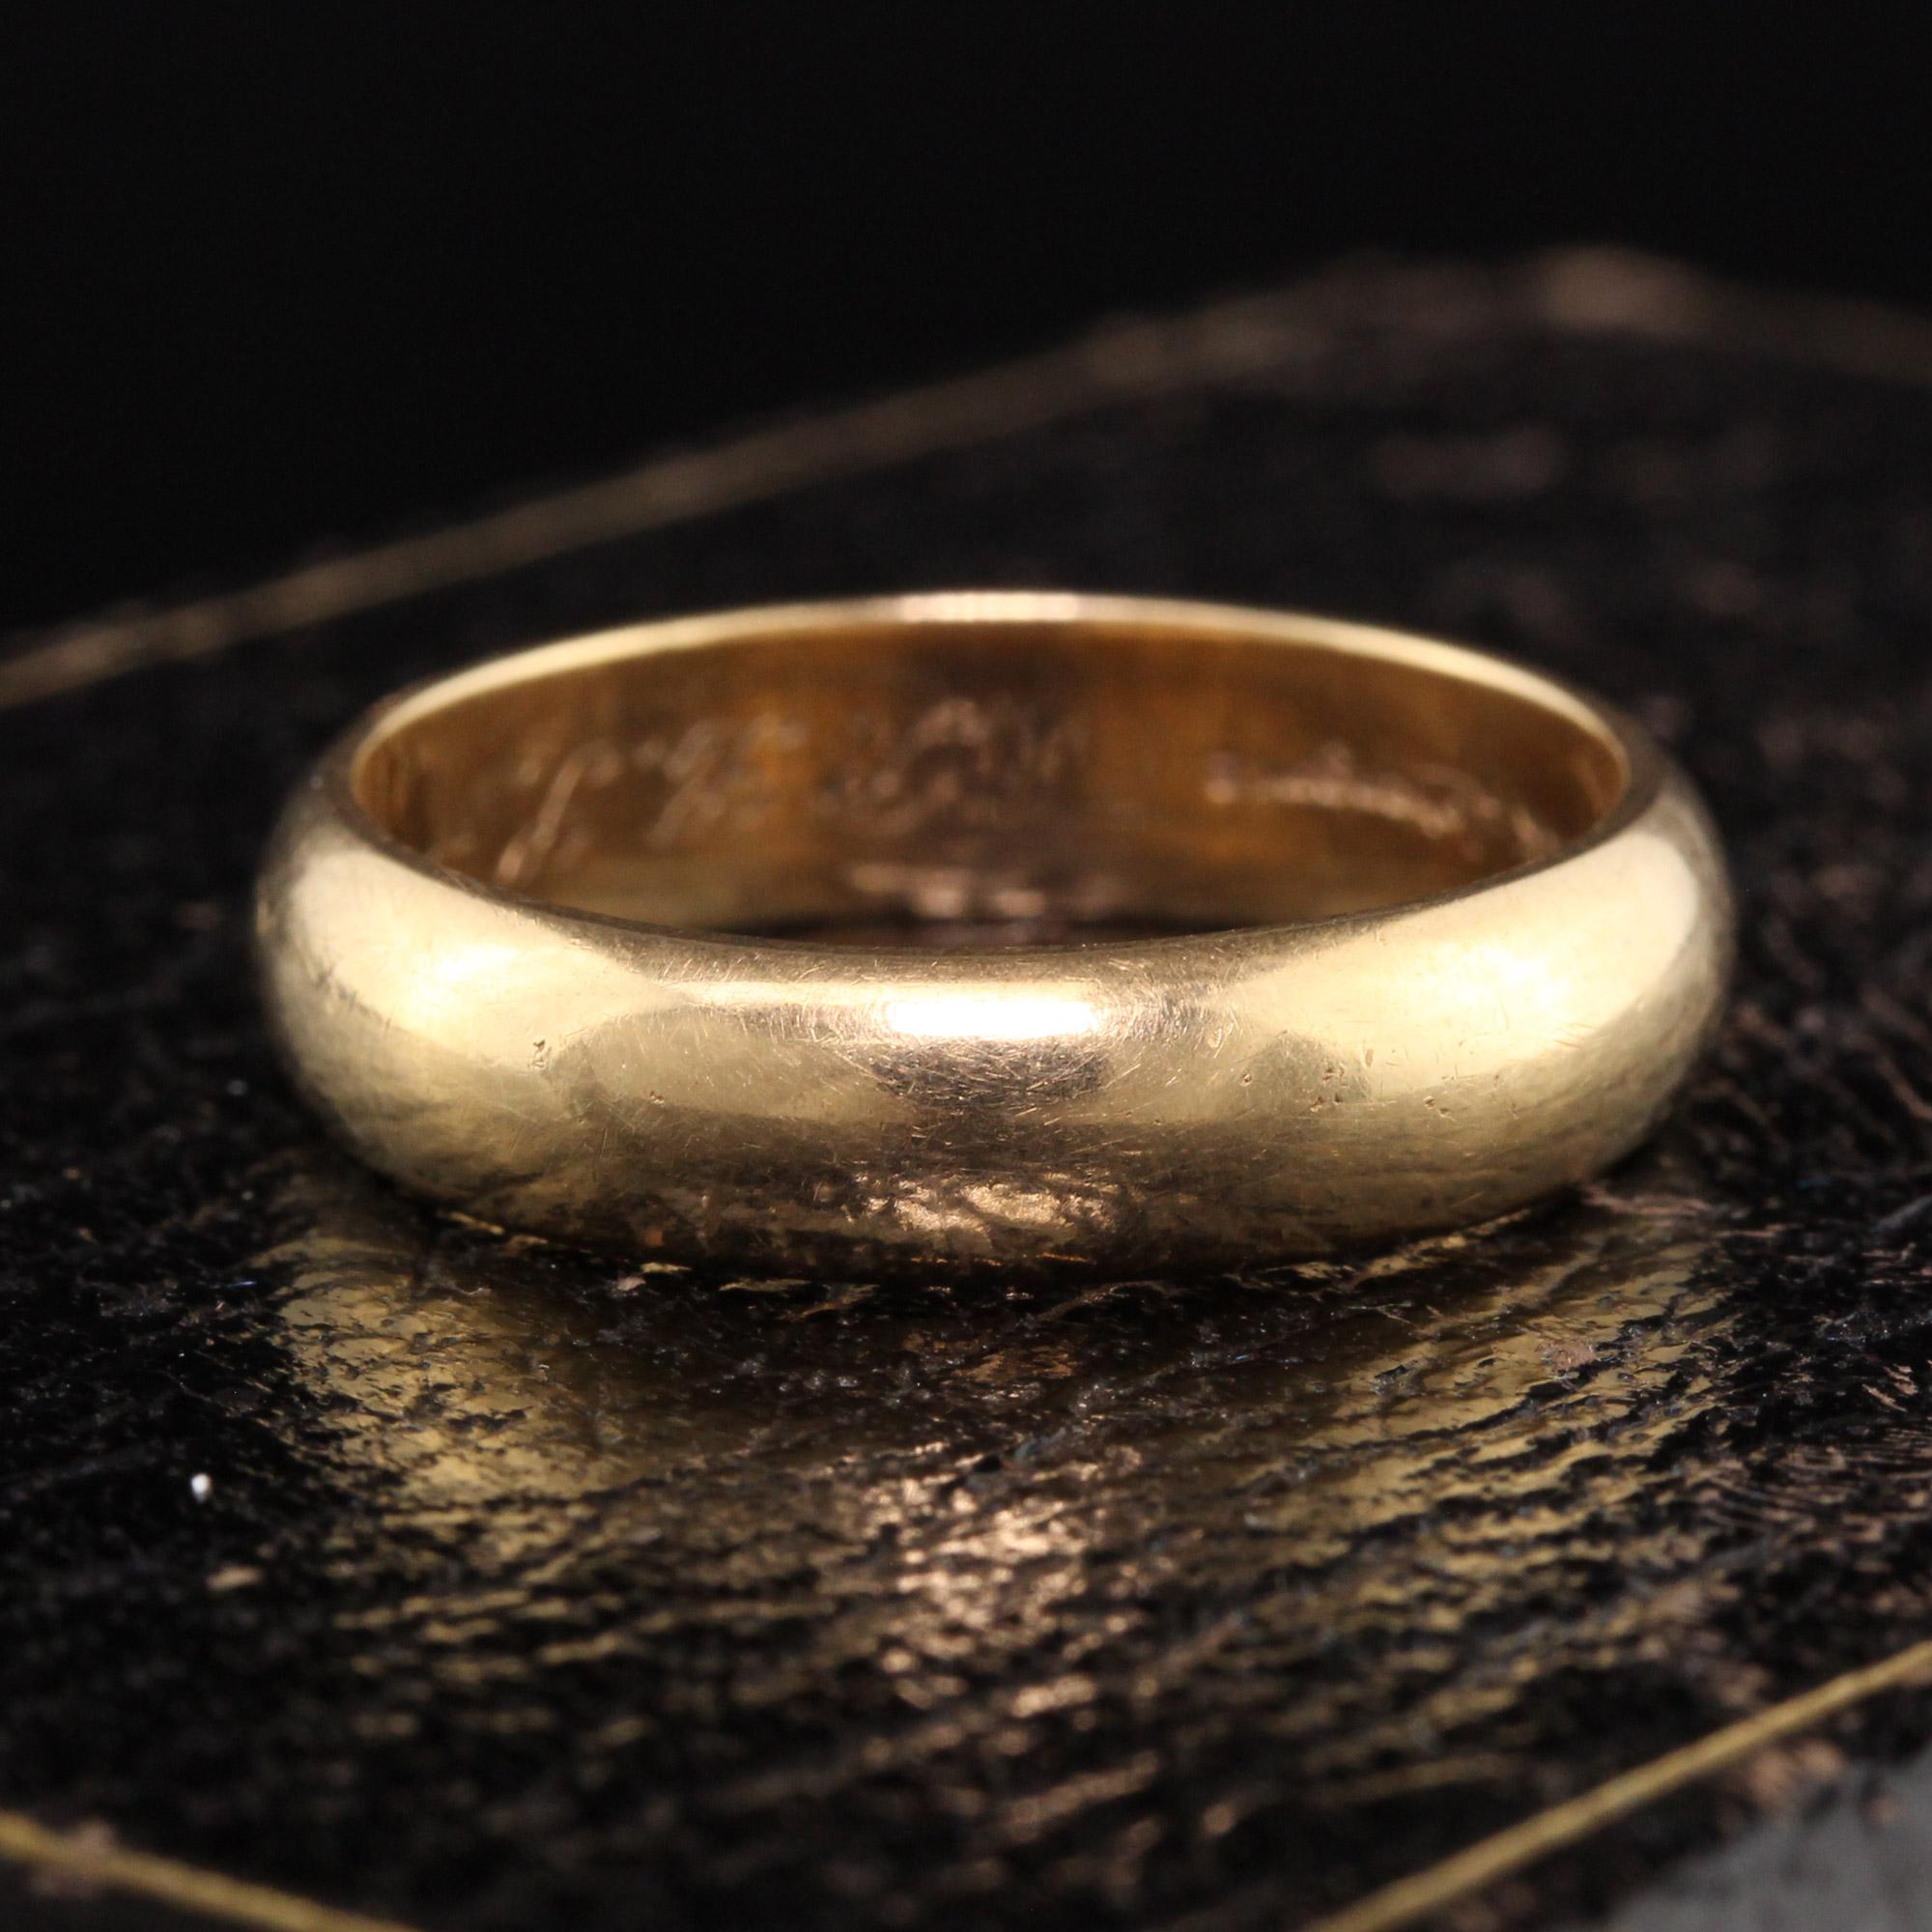 Beautiful Vintage Estate Lohengrin 14K Yellow Gold Engraved Wedding Band - Size 8. This classic wedding band is made by Lohengrin and has the engravings 